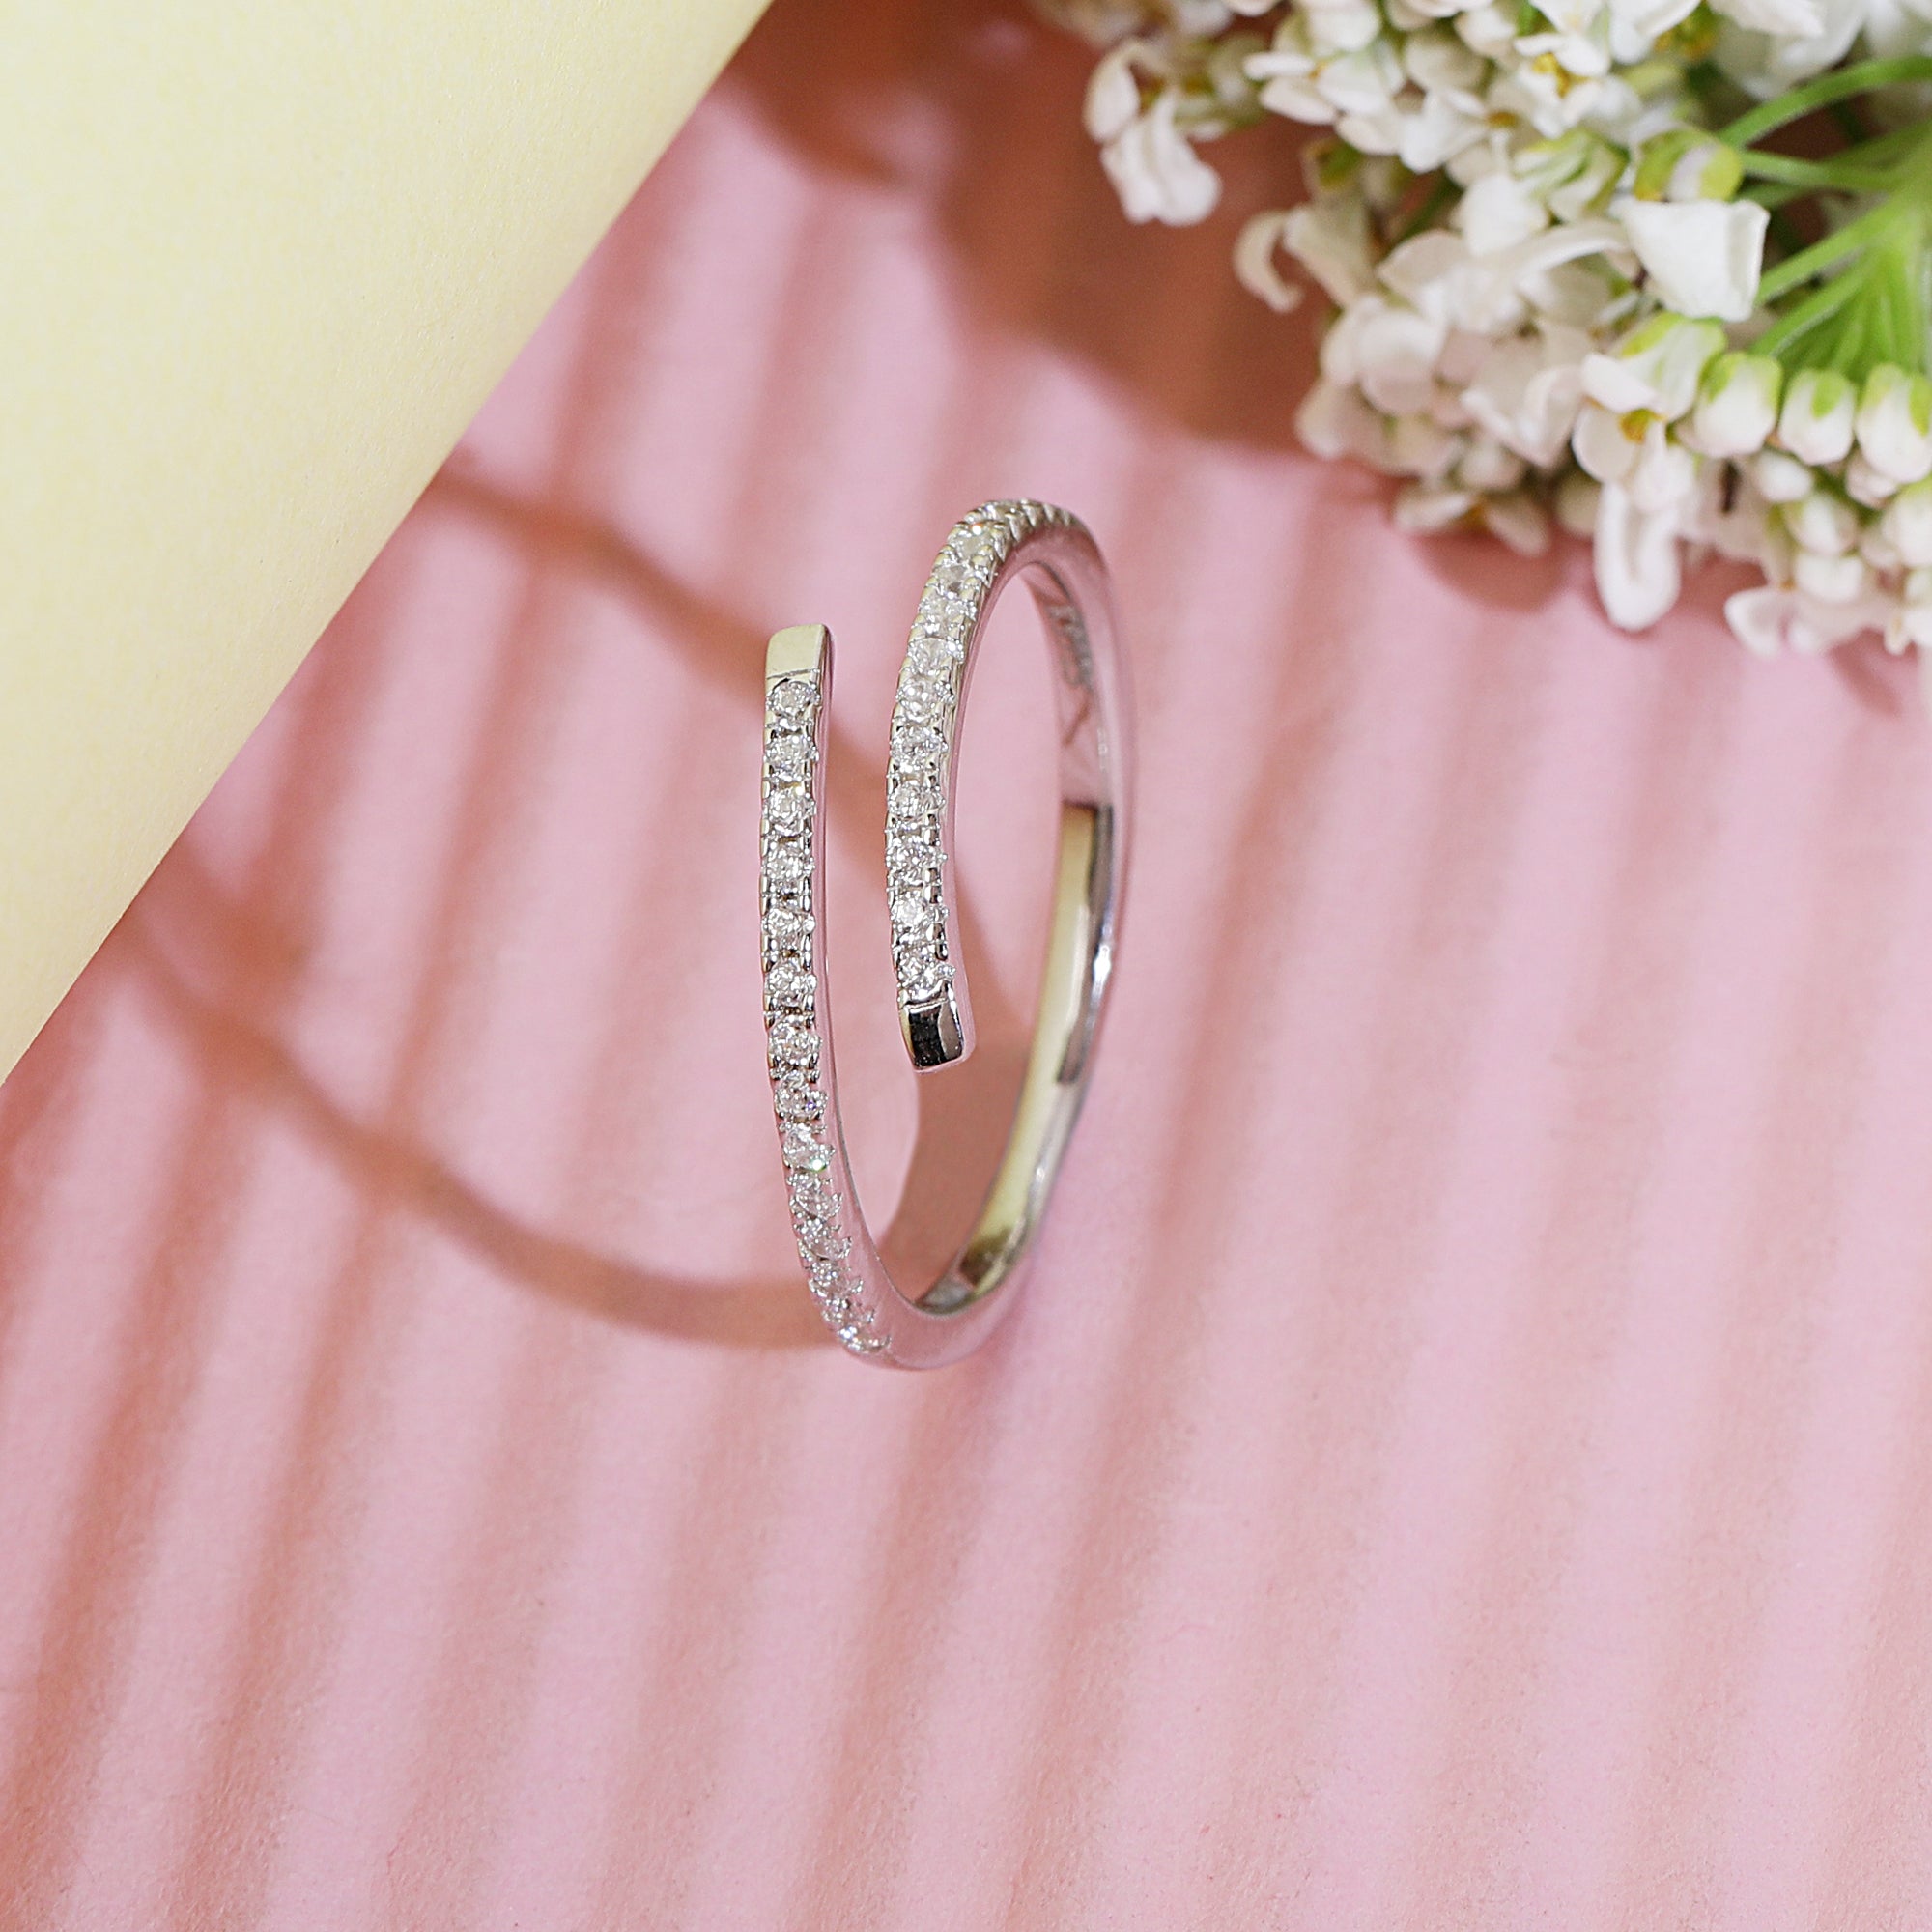 Diamond swirl ring in sterling silver  with adjustable size